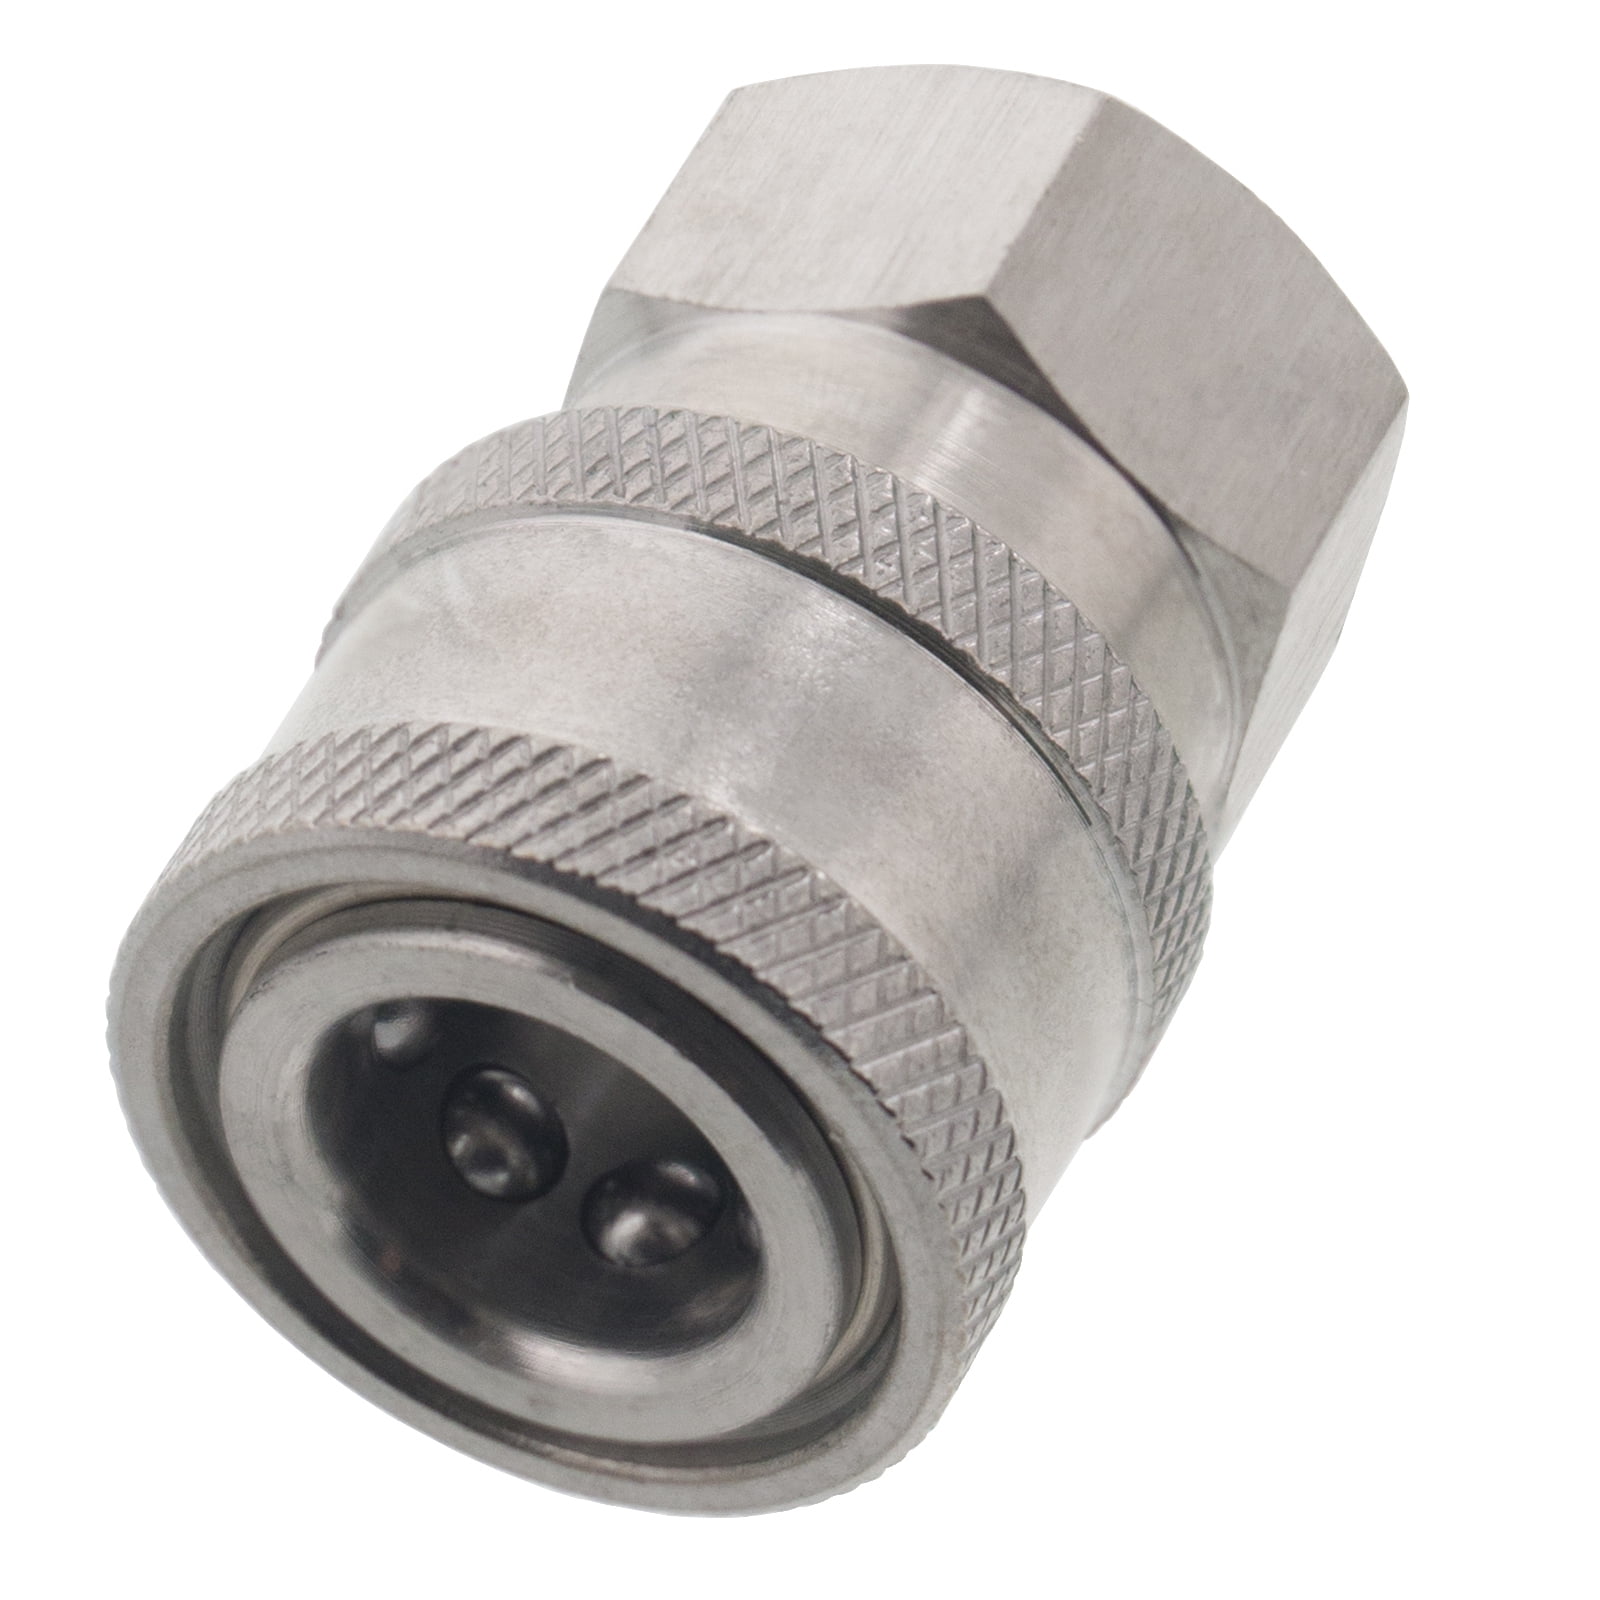 Stainless Steel Power Pressure Washer 1/4" FPT Quick Connect Plug Hose Connector